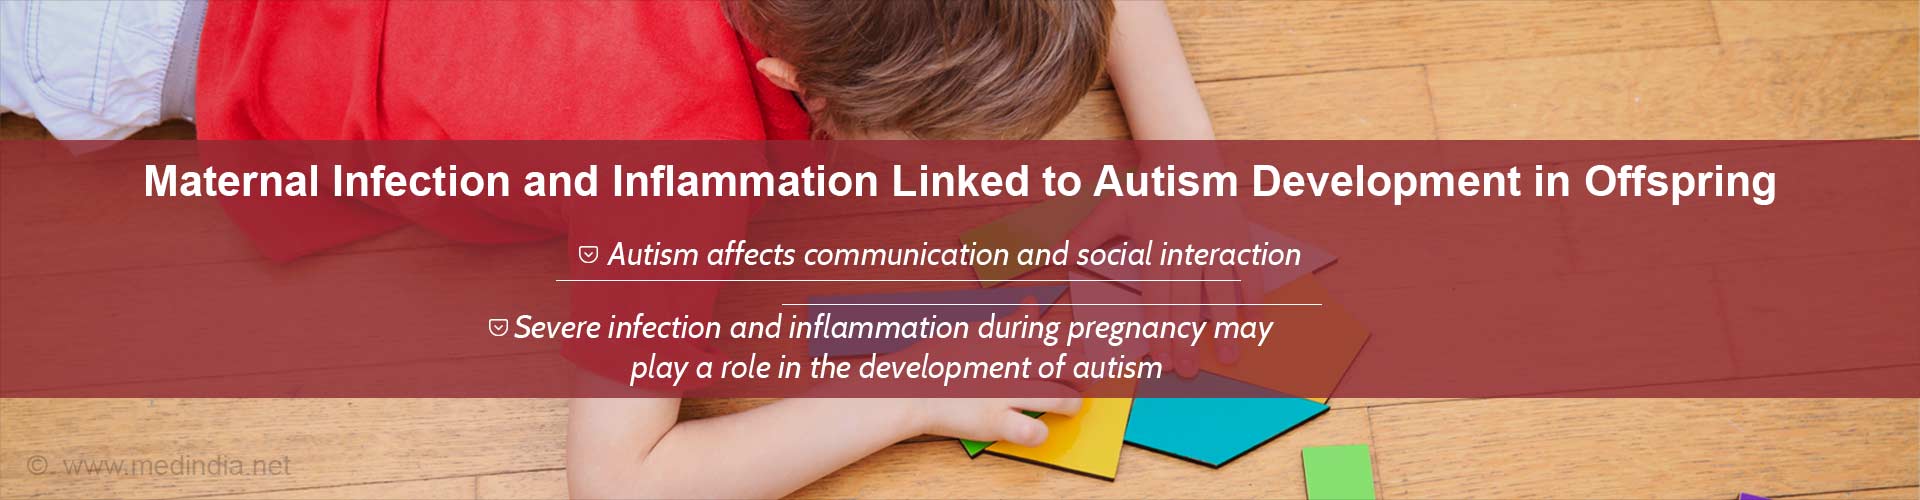 Maternal infection and inflammation linked to autism development offspring
- Autism affects communication and social interaction
- Severe infection and inflammation during pregnancy may play a role in the development of autism